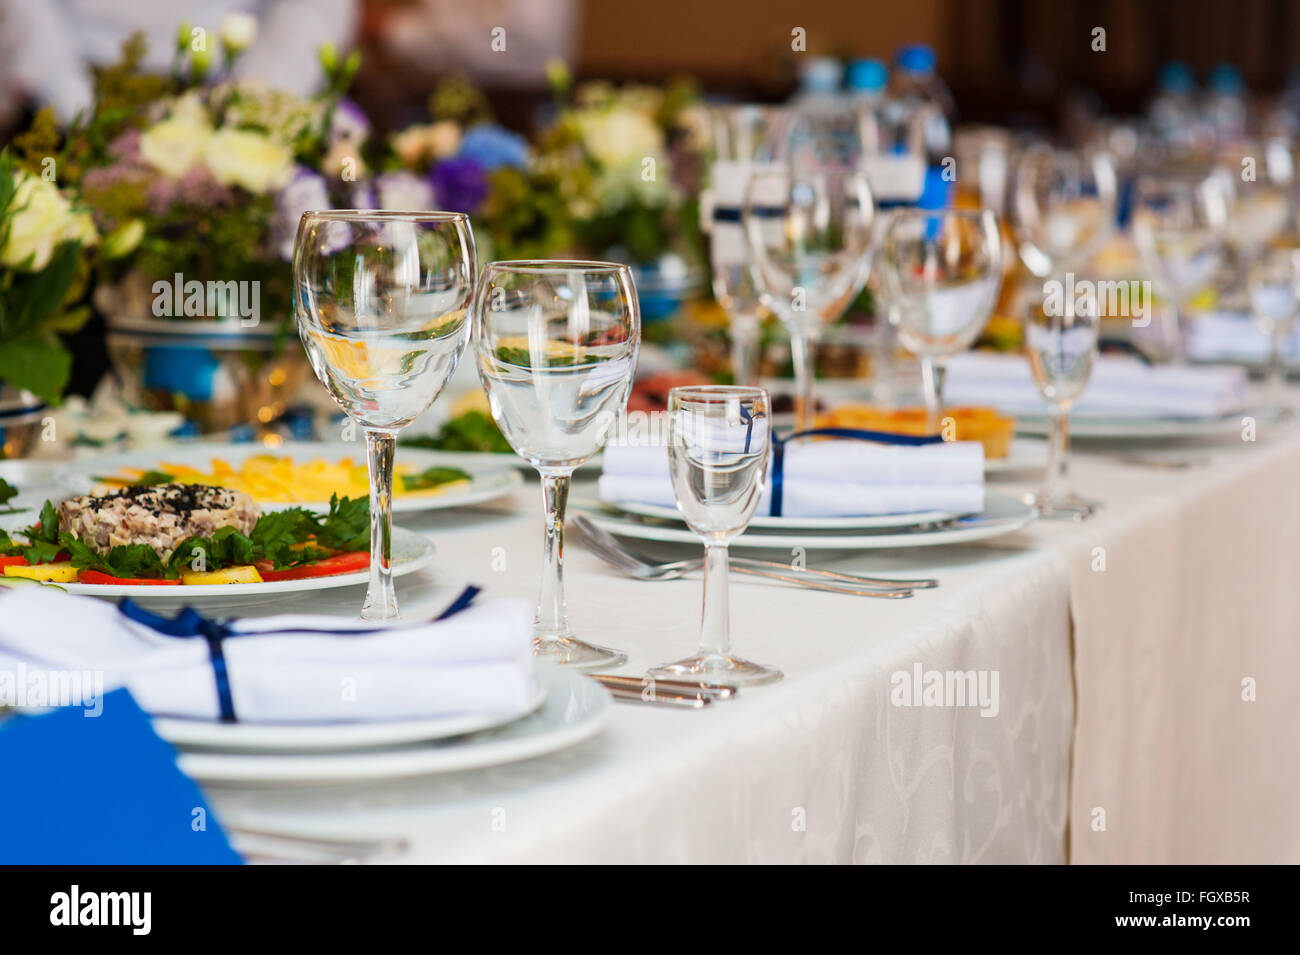 Wedding table served and decorated in a restaurant Stock Photo